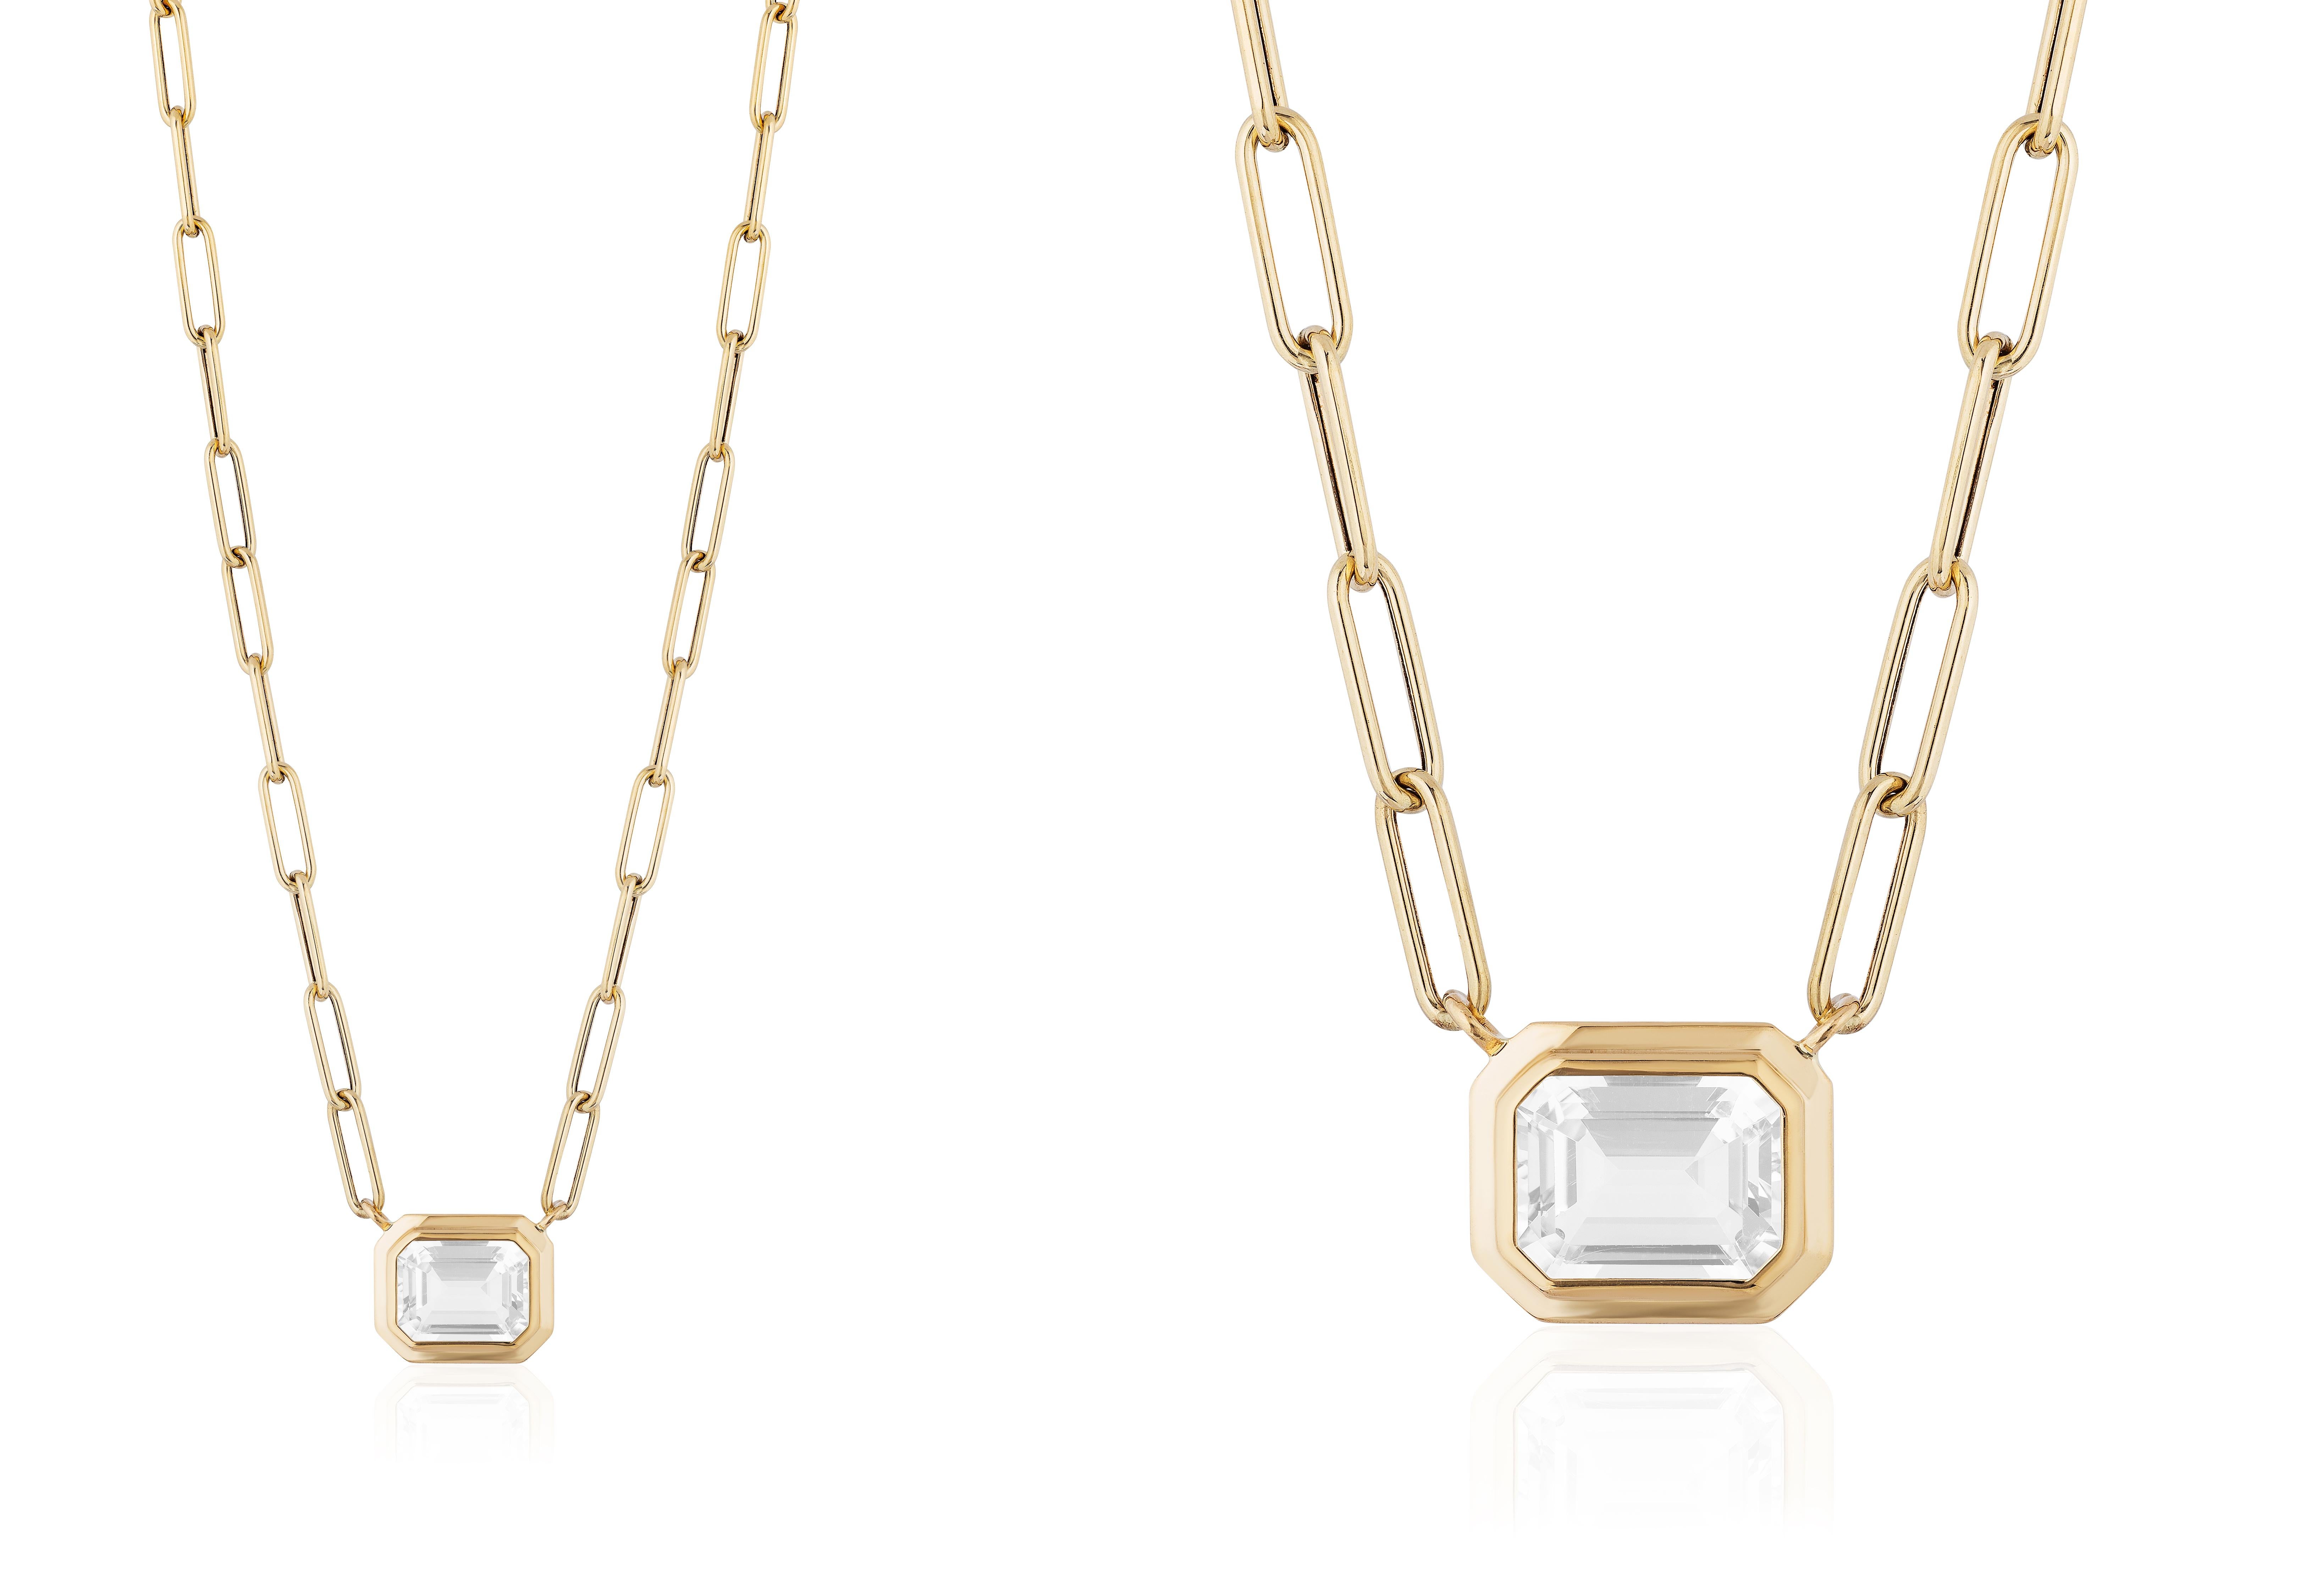 This beautiful East-West Moon Quartz Emerald Cut Bezel Set Pendant in 18K Yellow Gold is from our ‘Manhattan’ Collection. Minimalist lines yet bold structures are what our Manhattan Collection is all about. Our pieces represent the famous skyline